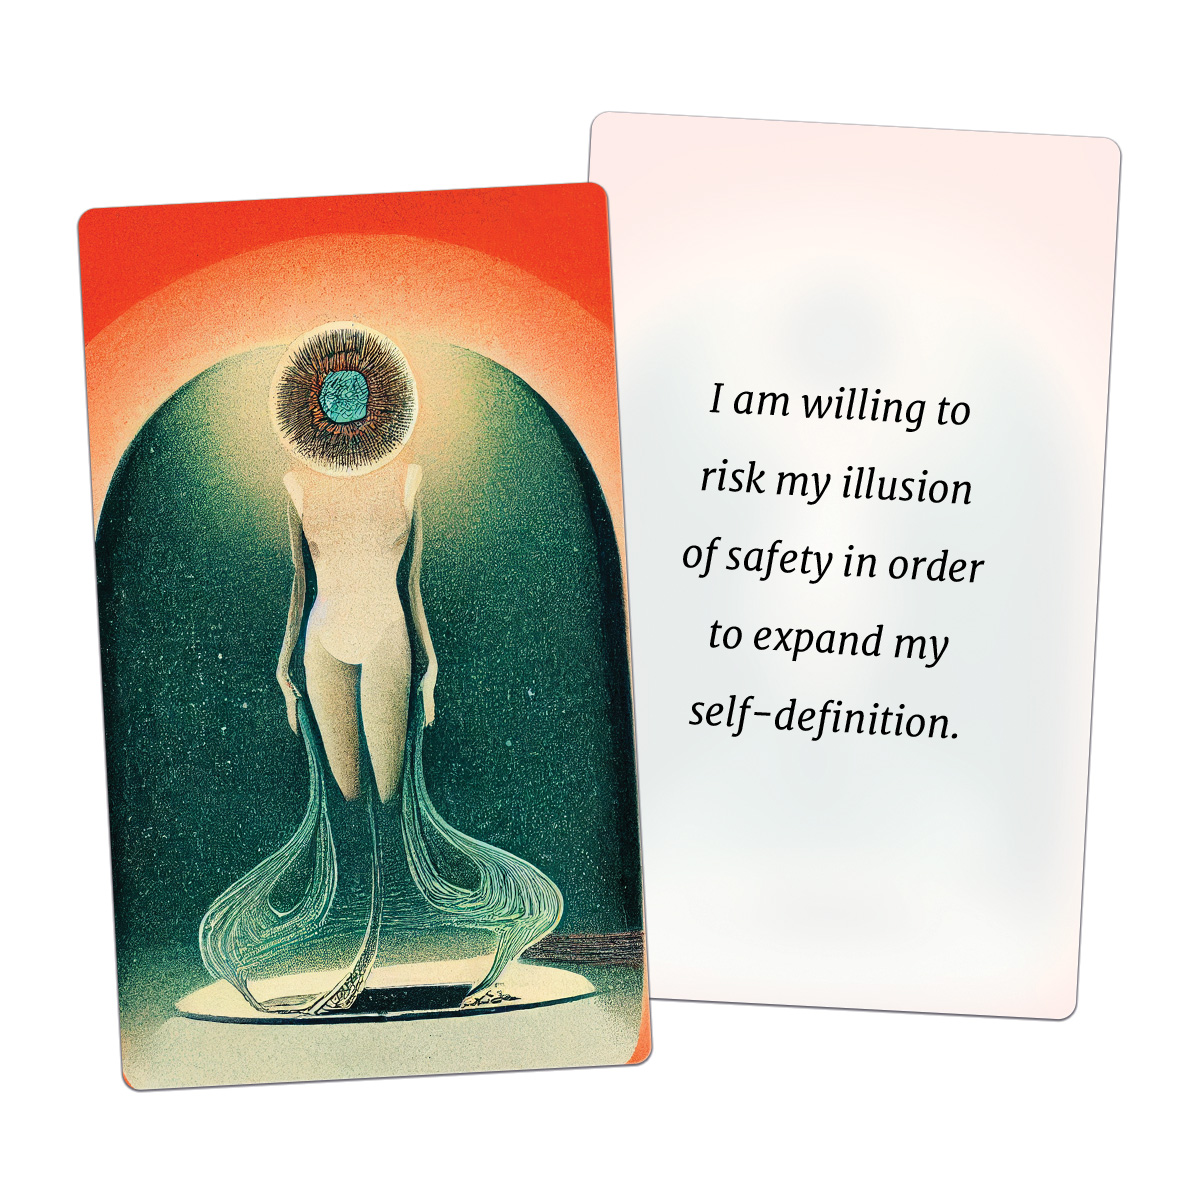 I am willing to risk my illusion of safety in order to expand my self-definition. (AFFIRMATION CARD)